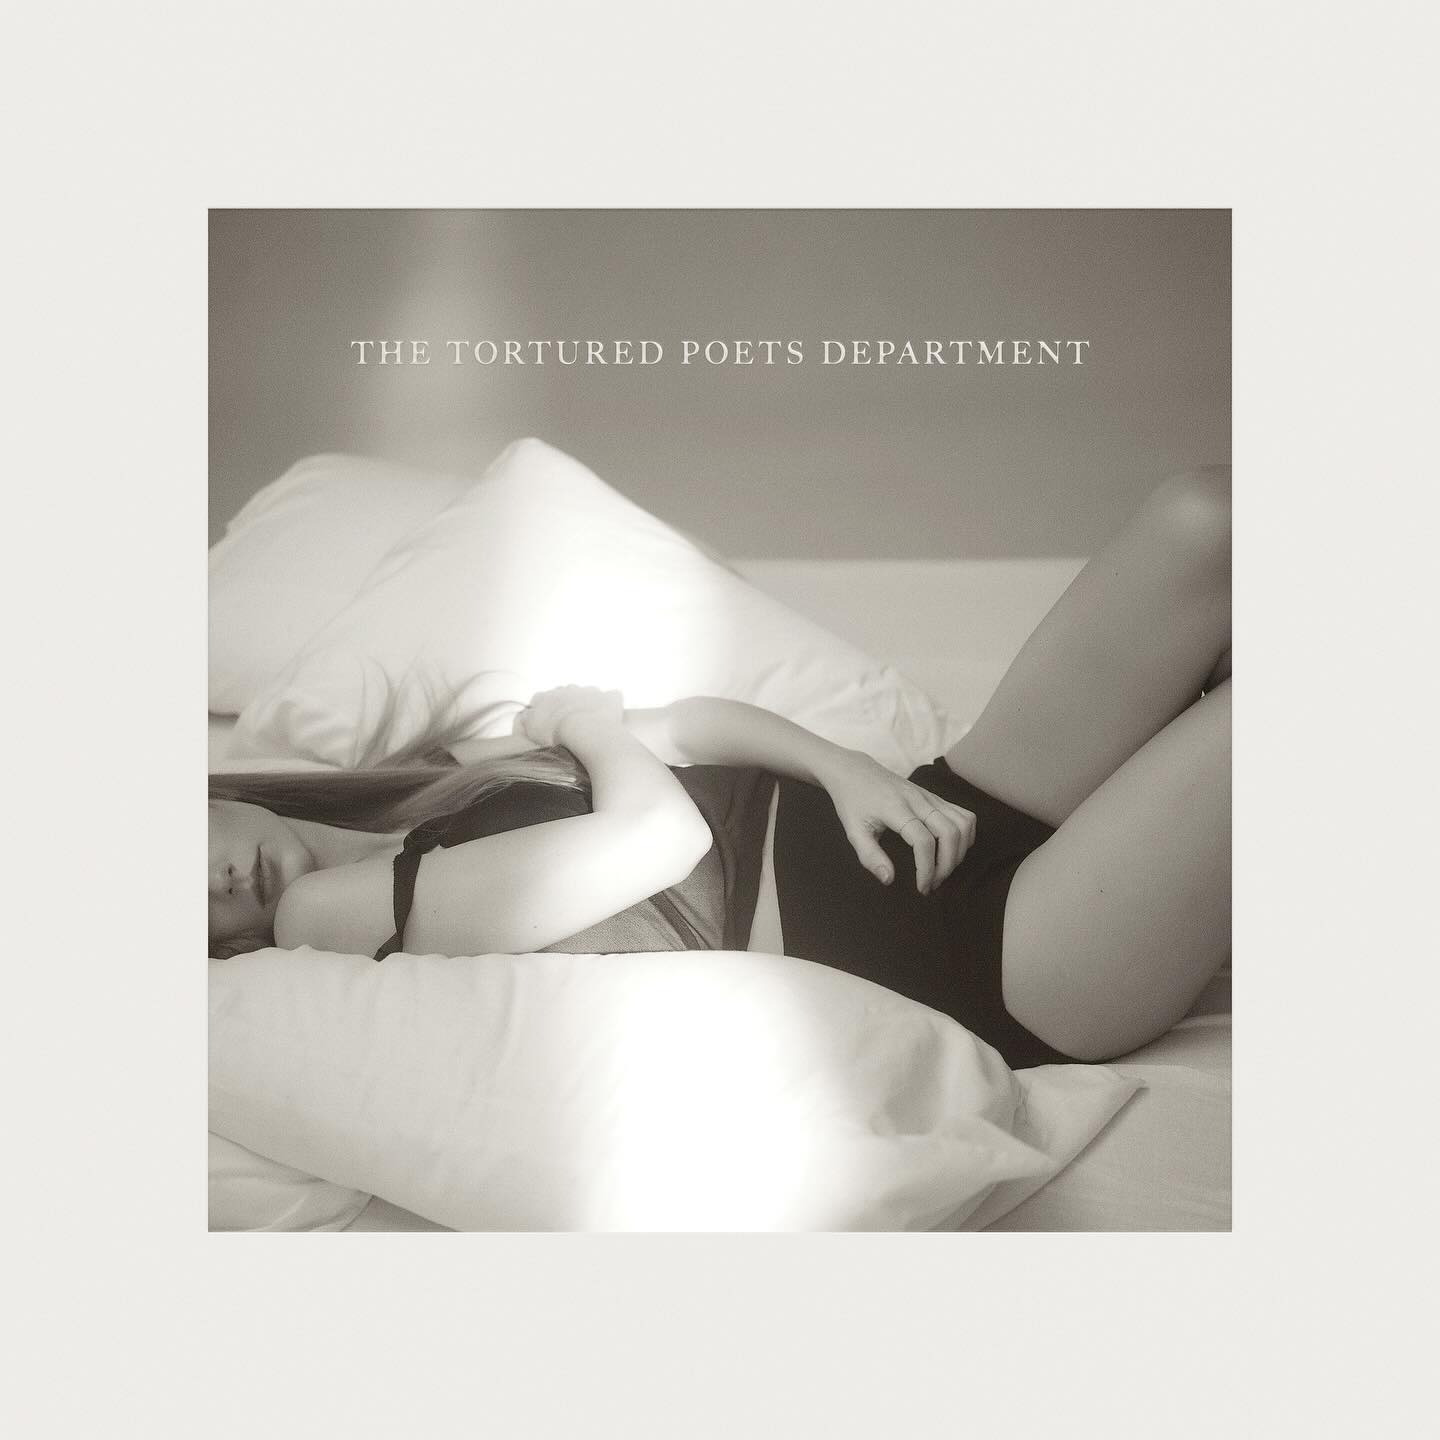 Album 'The Tortured Poets Department': Dây cứu sinh của Taylor Swift - Ảnh 4.